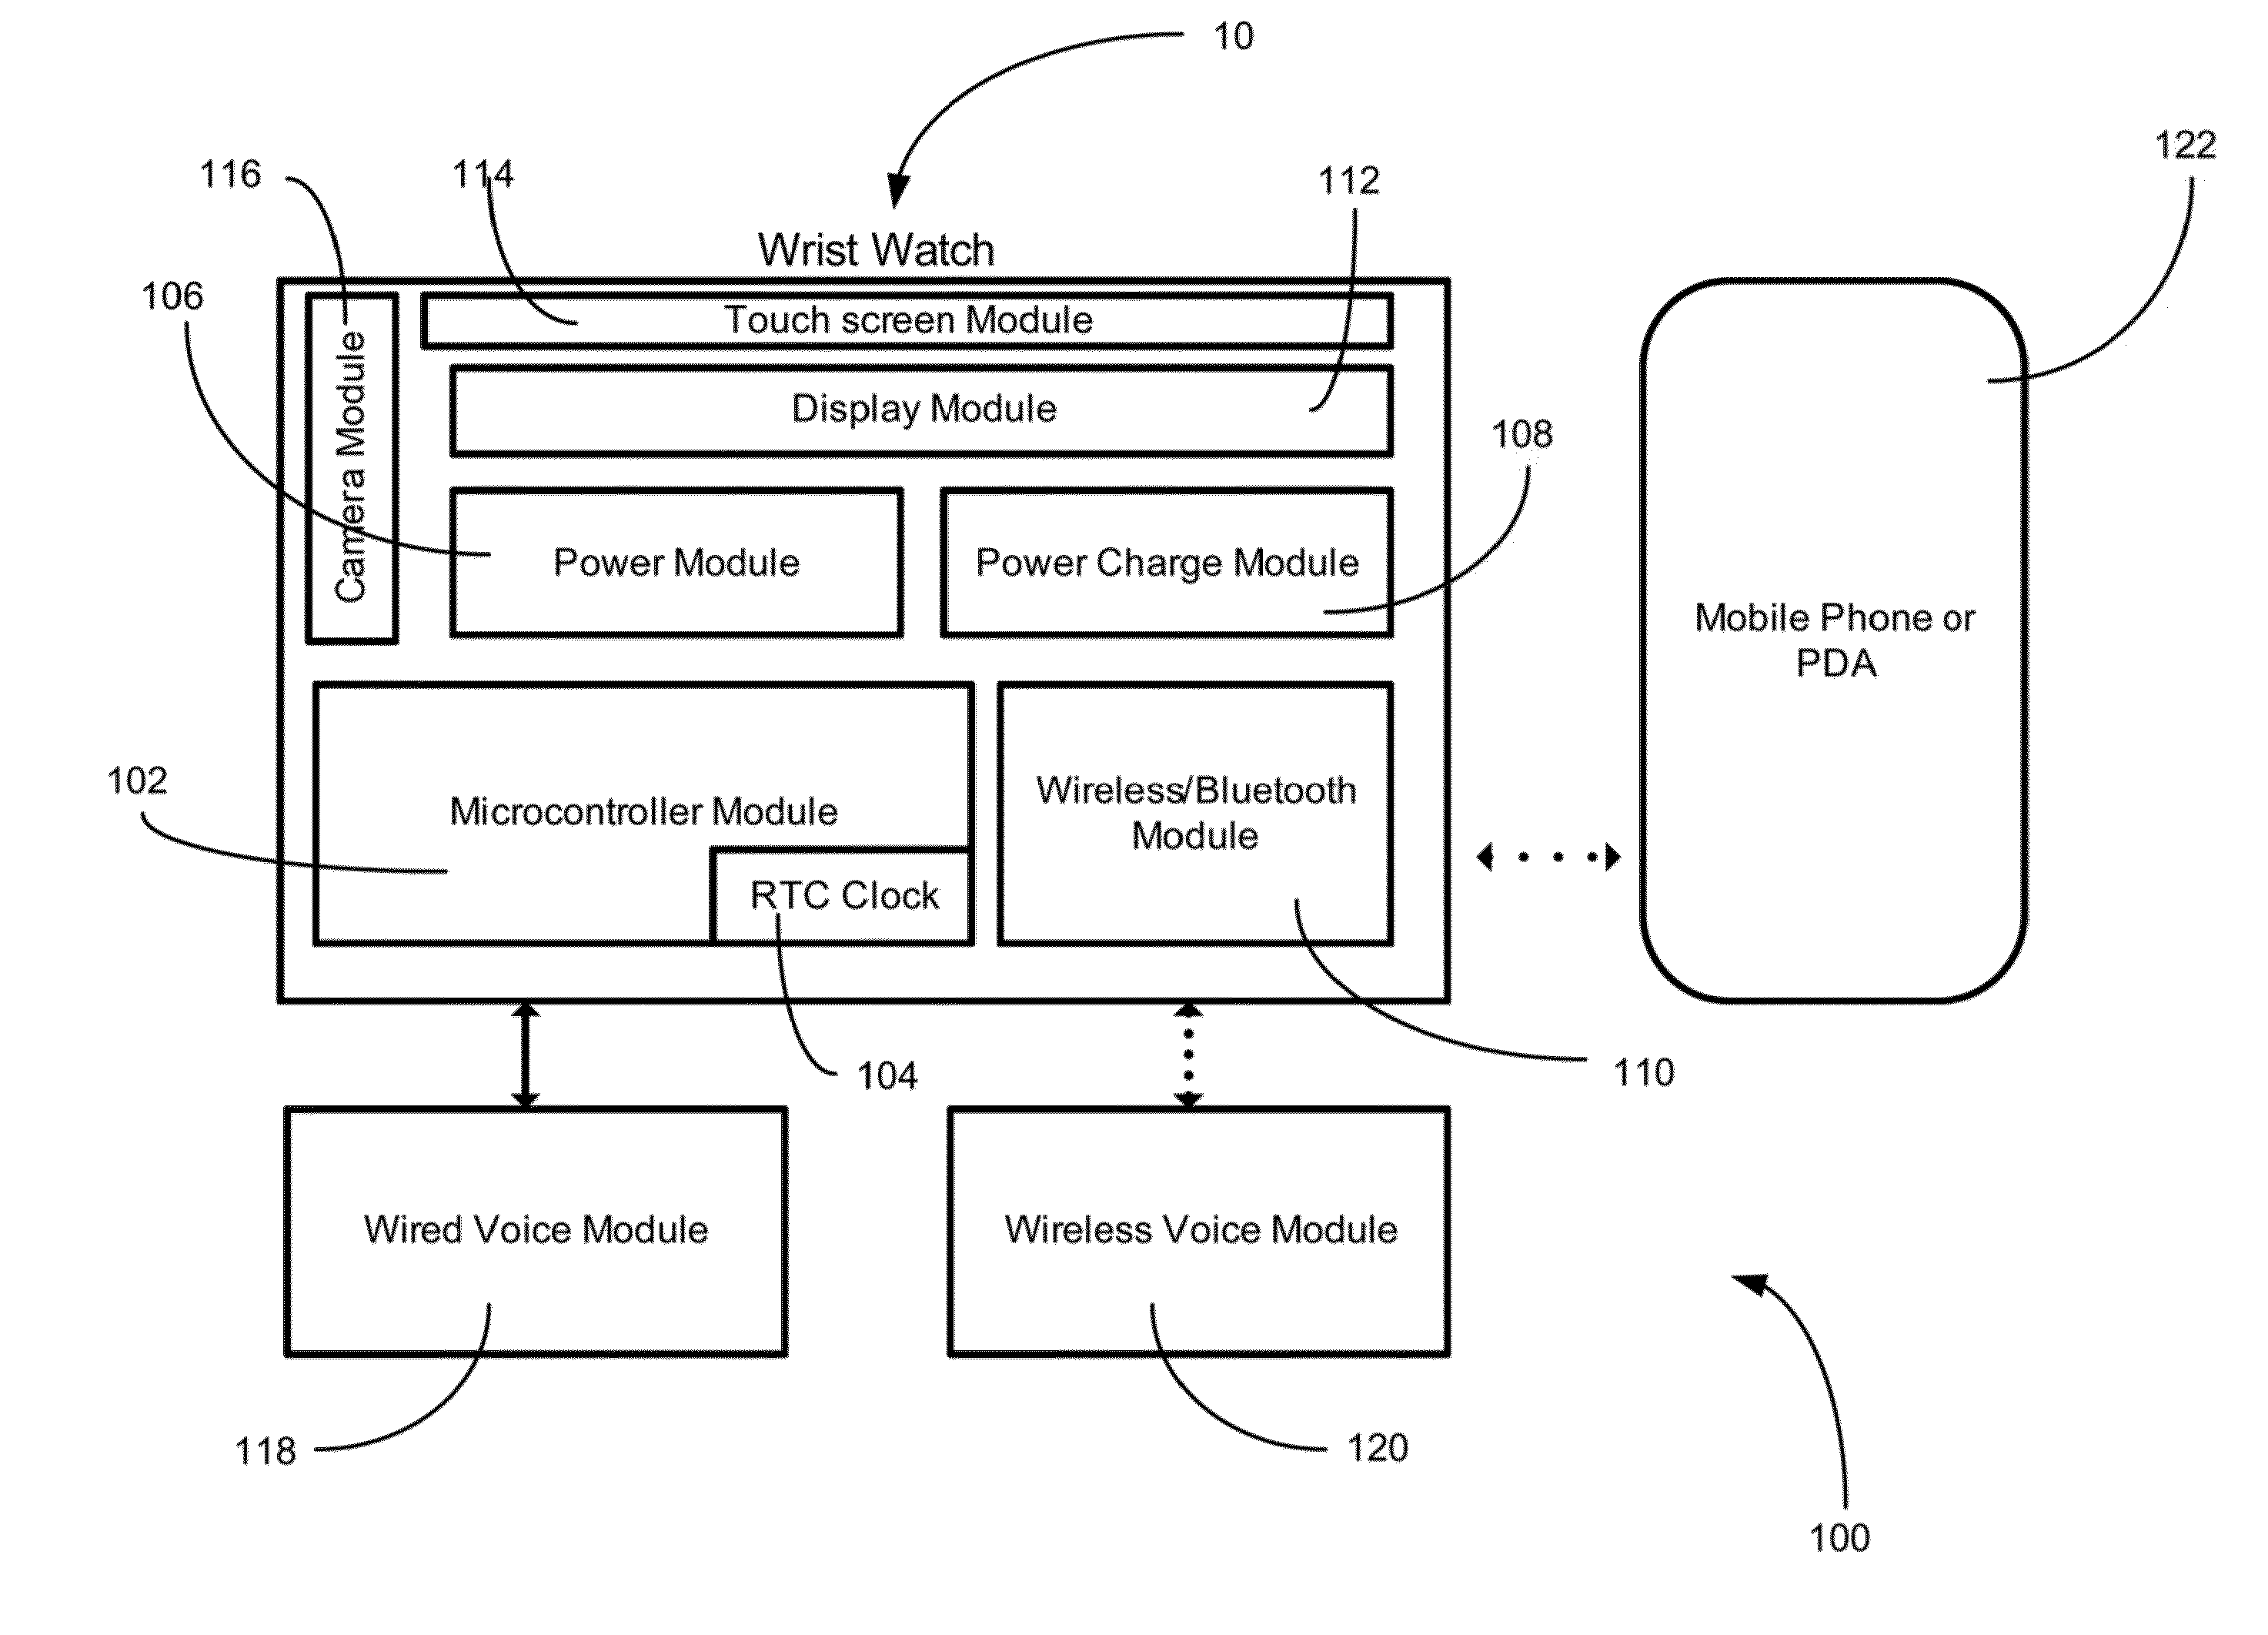 Apparatus utilizing projected sound in a mobile companion device